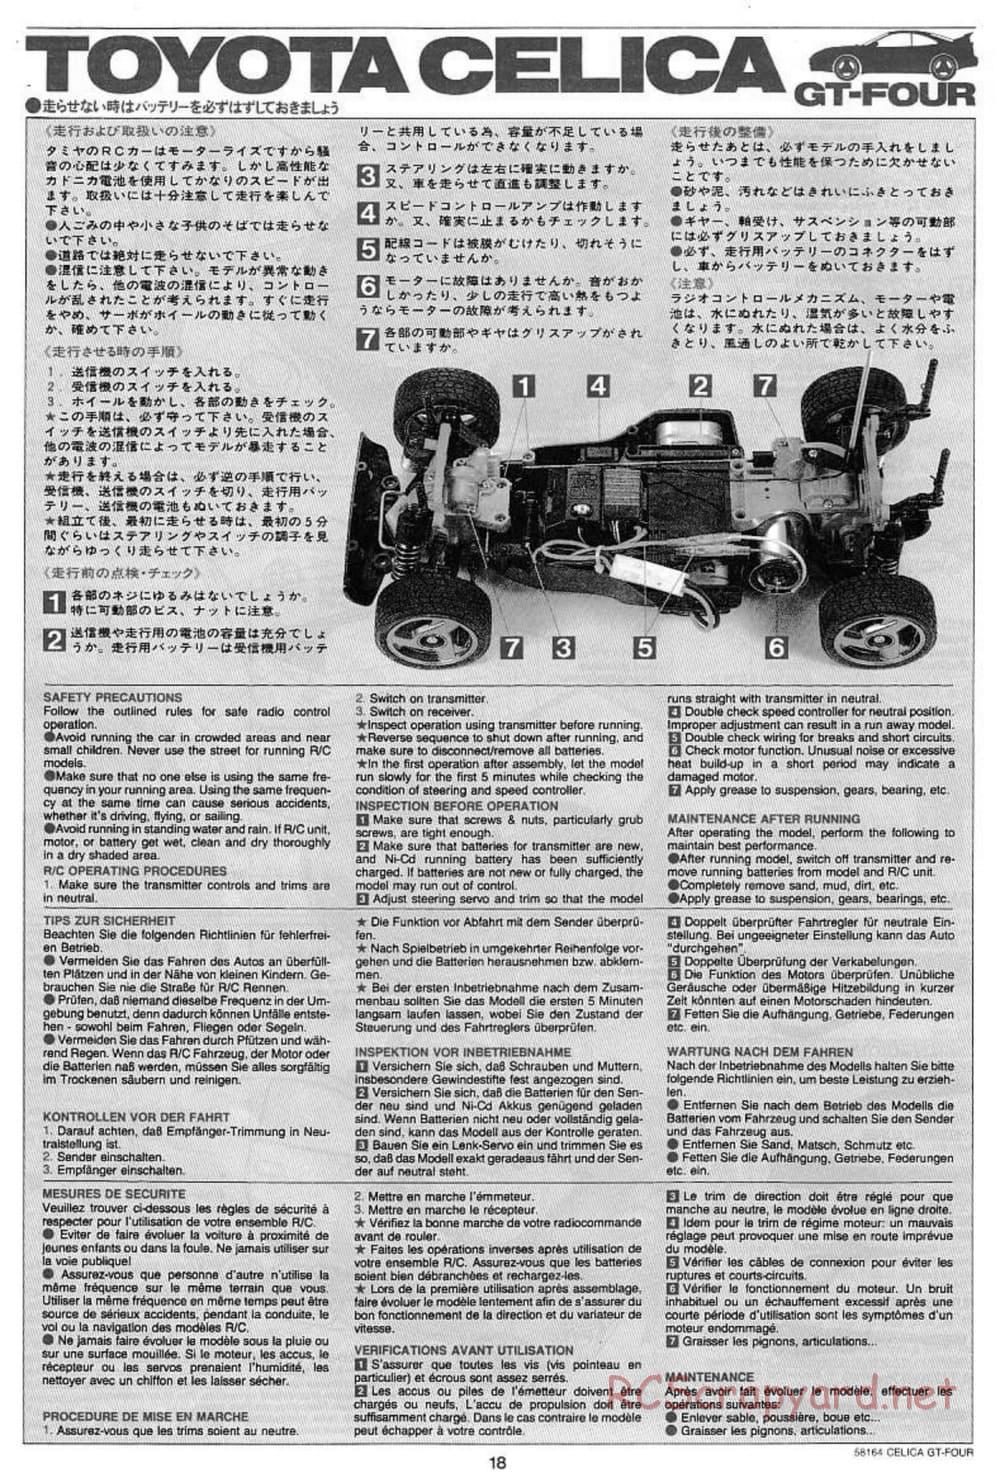 Tamiya - Toyota Celica GT Four - TA-02 Chassis - Manual - Page 19